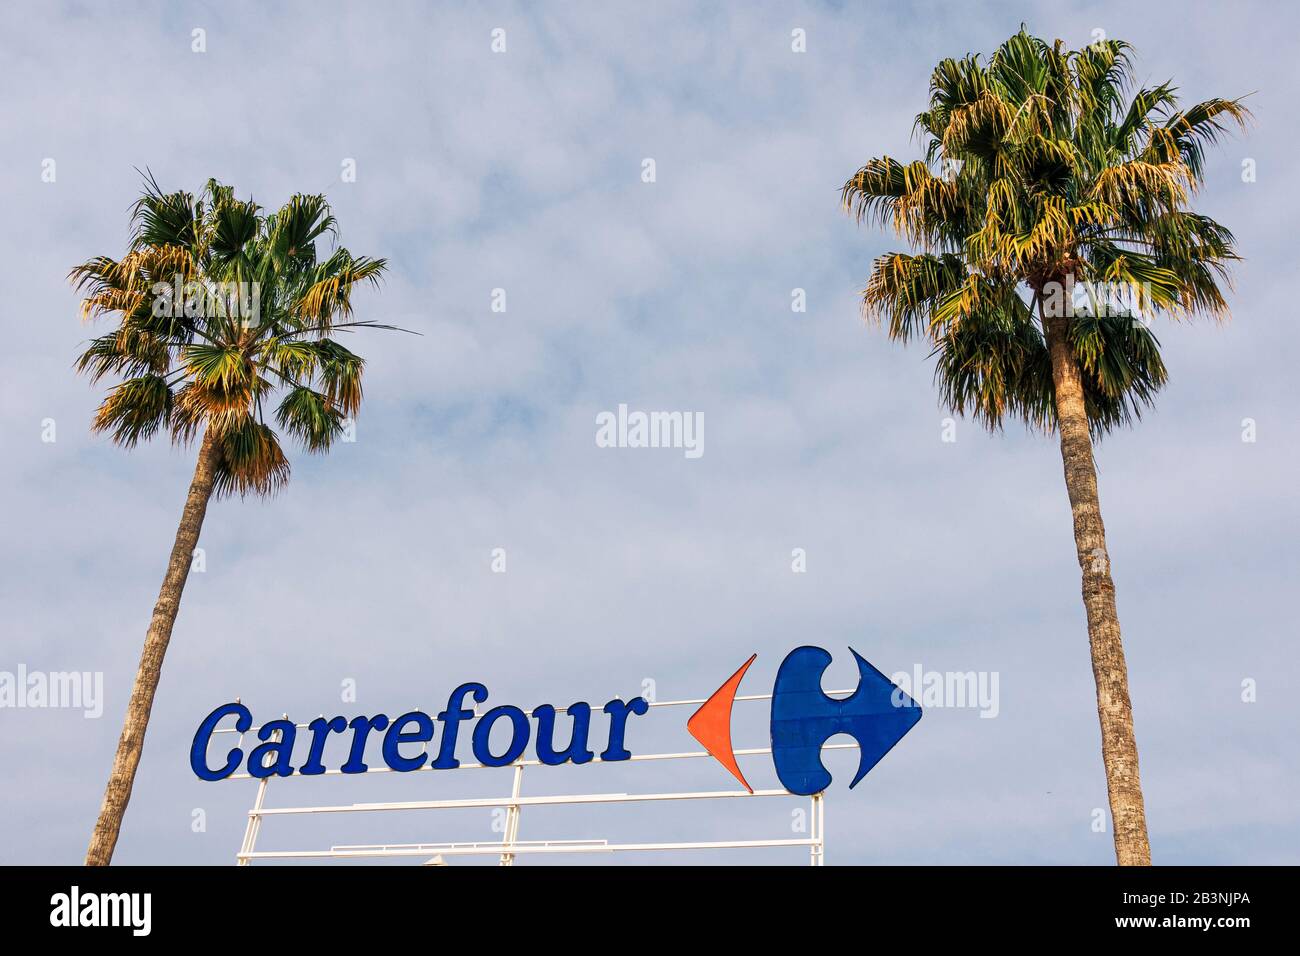 Finestrat, Spain - March 5, 2020: Carrefour logo on Carrefour supermarket with blue sky and palms background Stock Photo